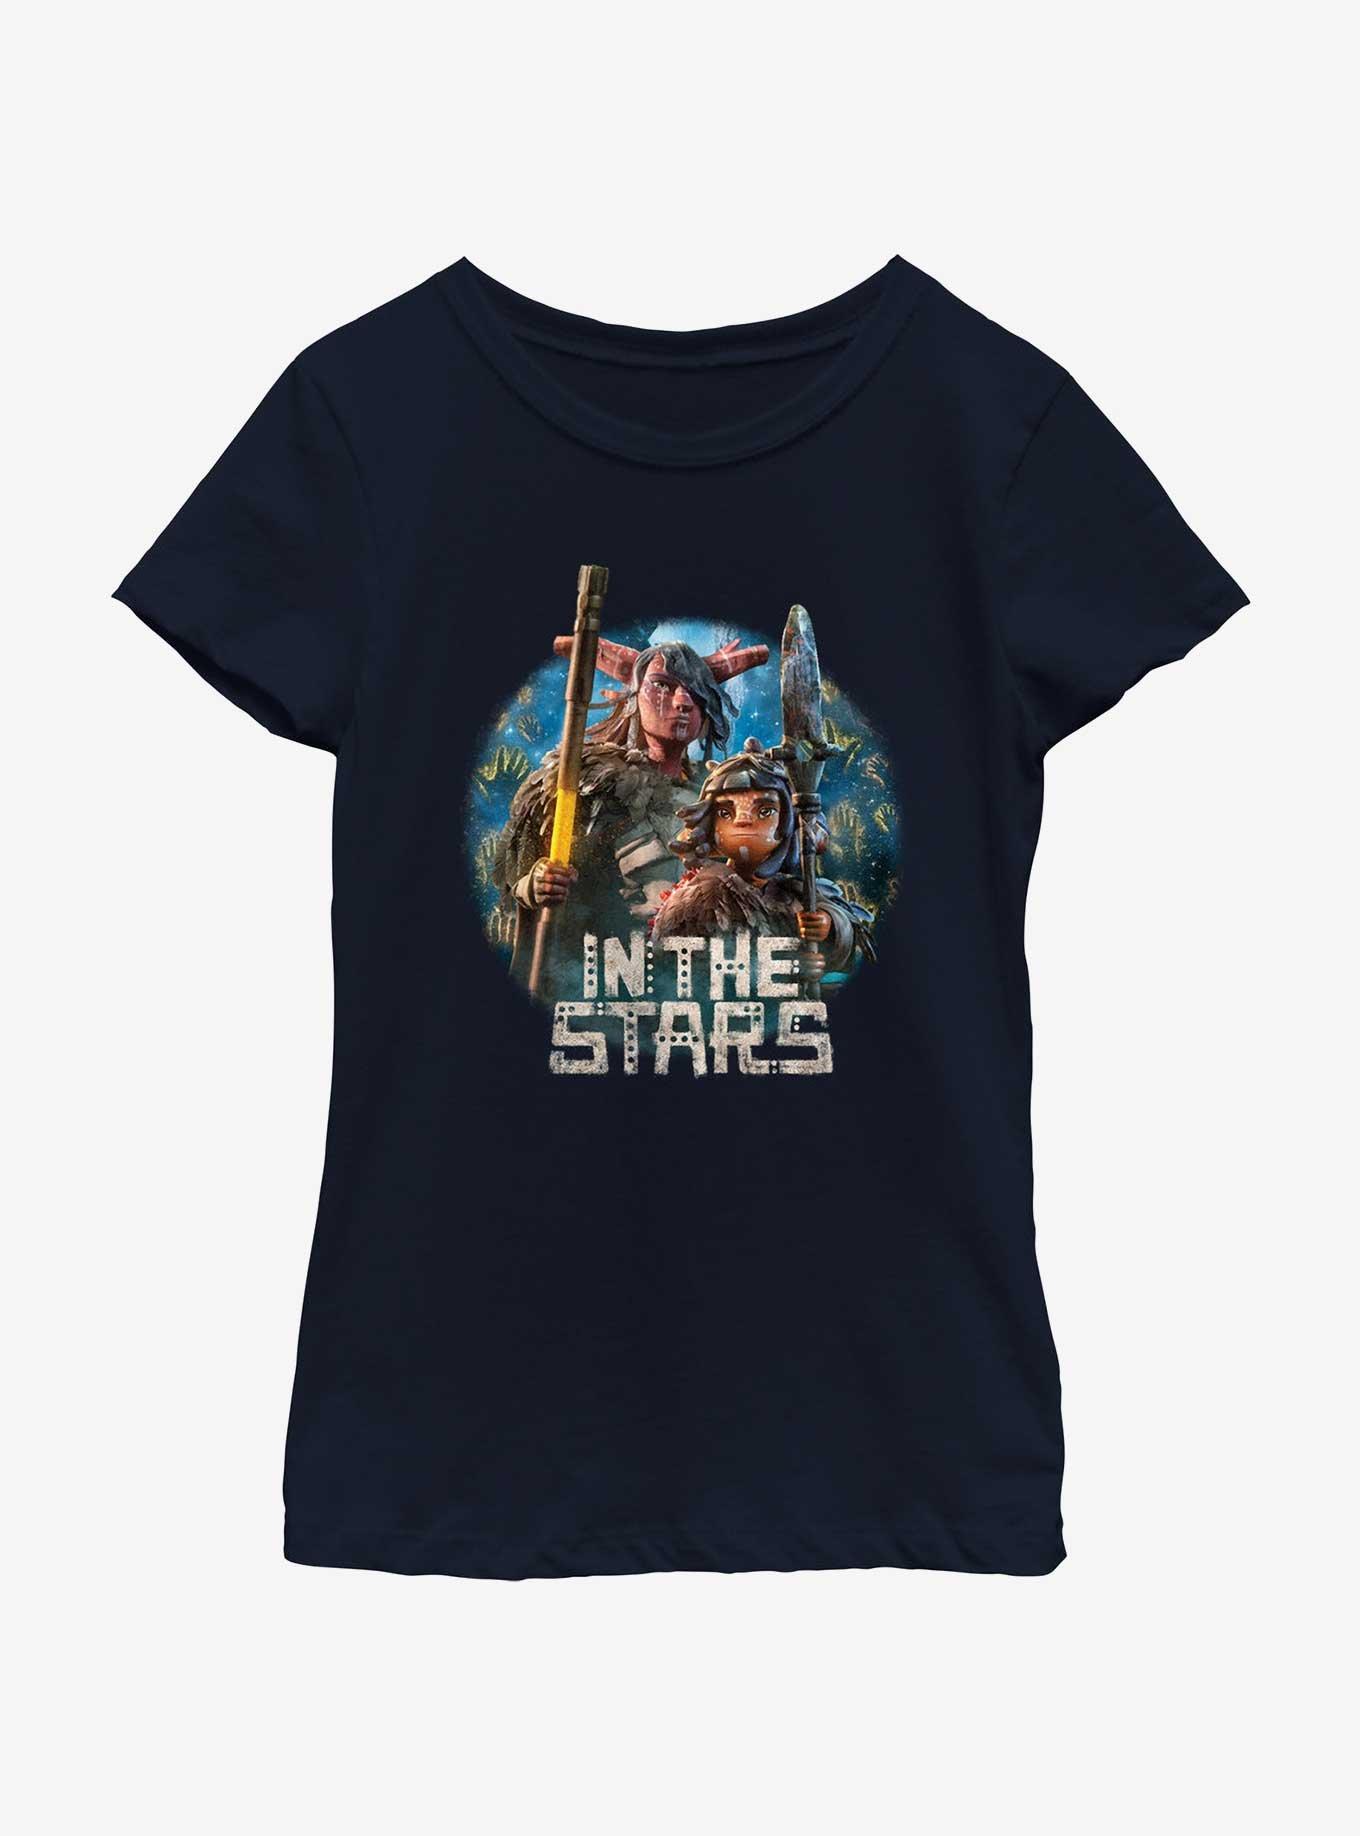 Star Wars: Visions In The Stars Youth Girls T-Shirt, NAVY, hi-res